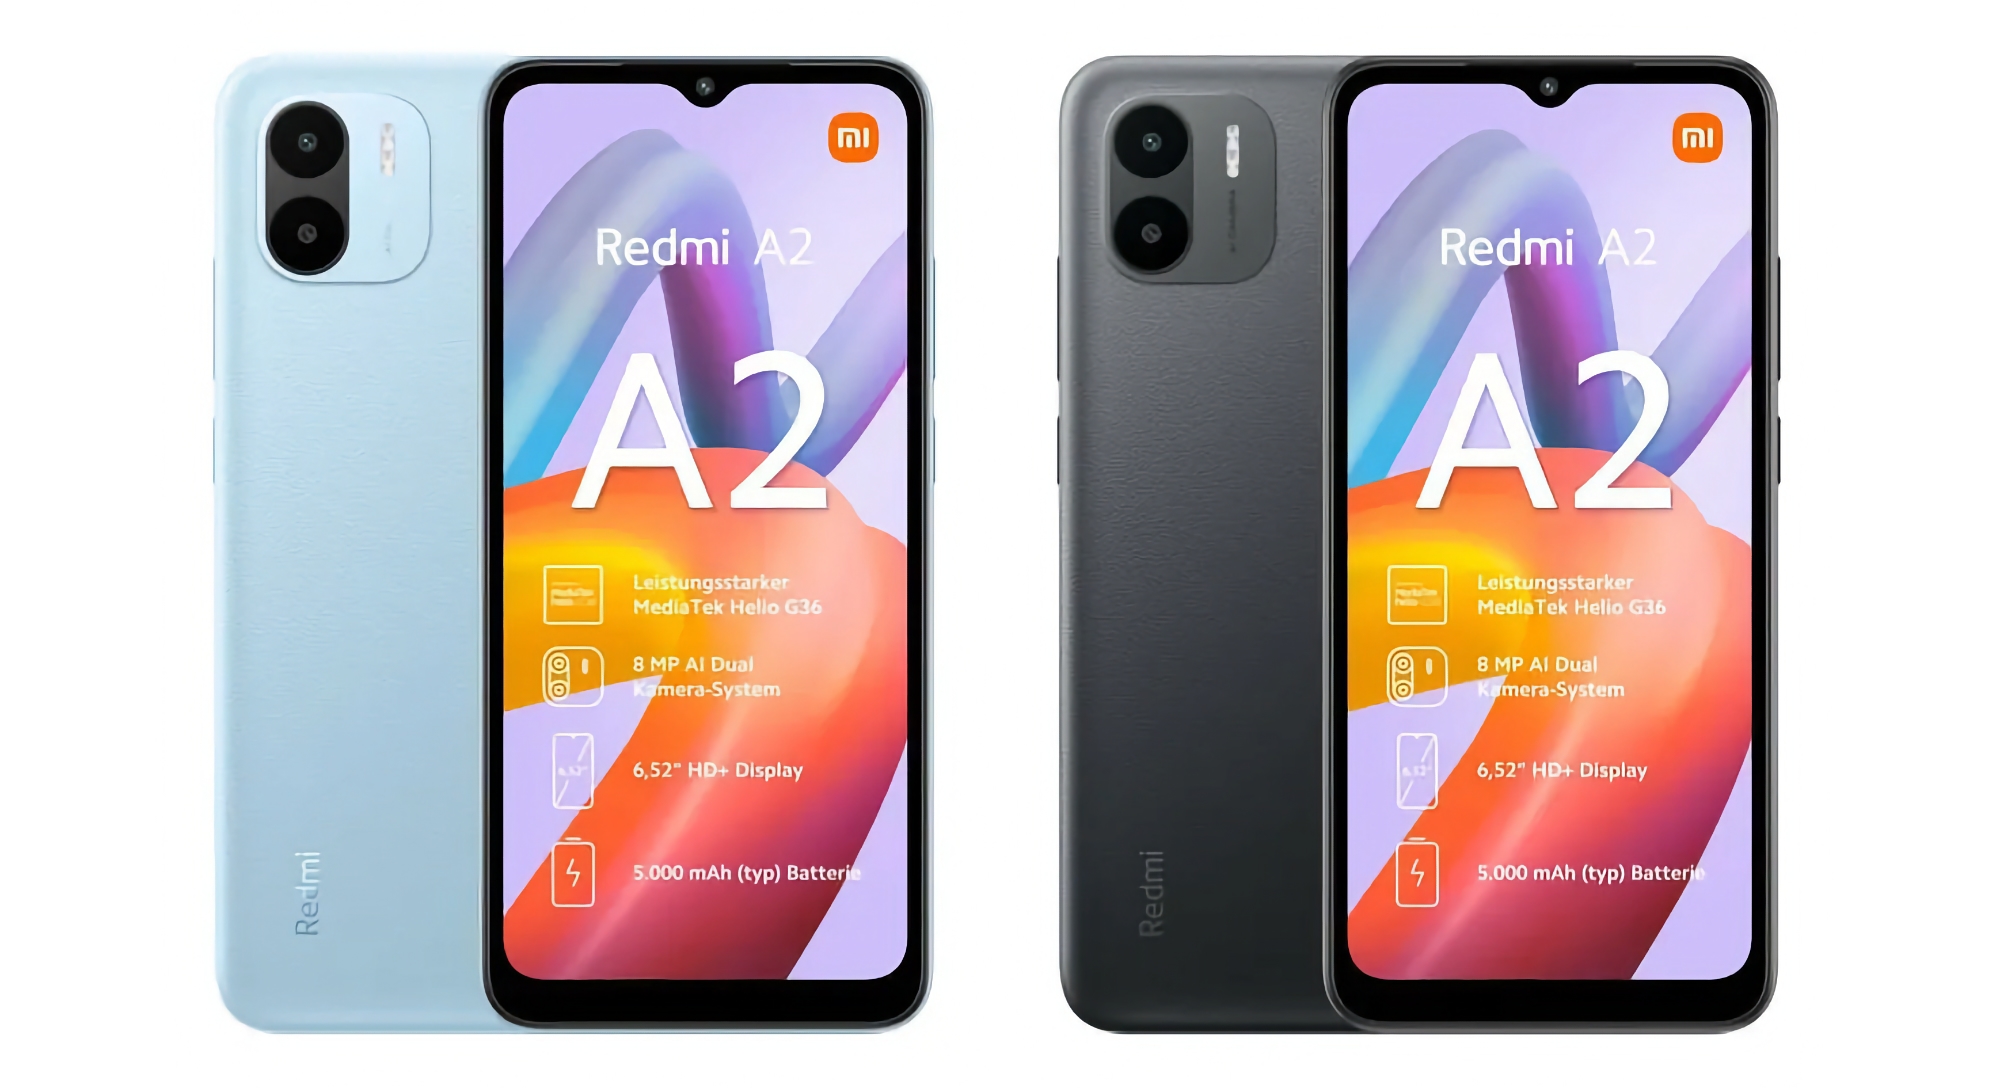 Xiaomi prepares to launch budget smartphone Redmi A2 with dual camera, MediaTek Helio G36 chip and price under 100 euros